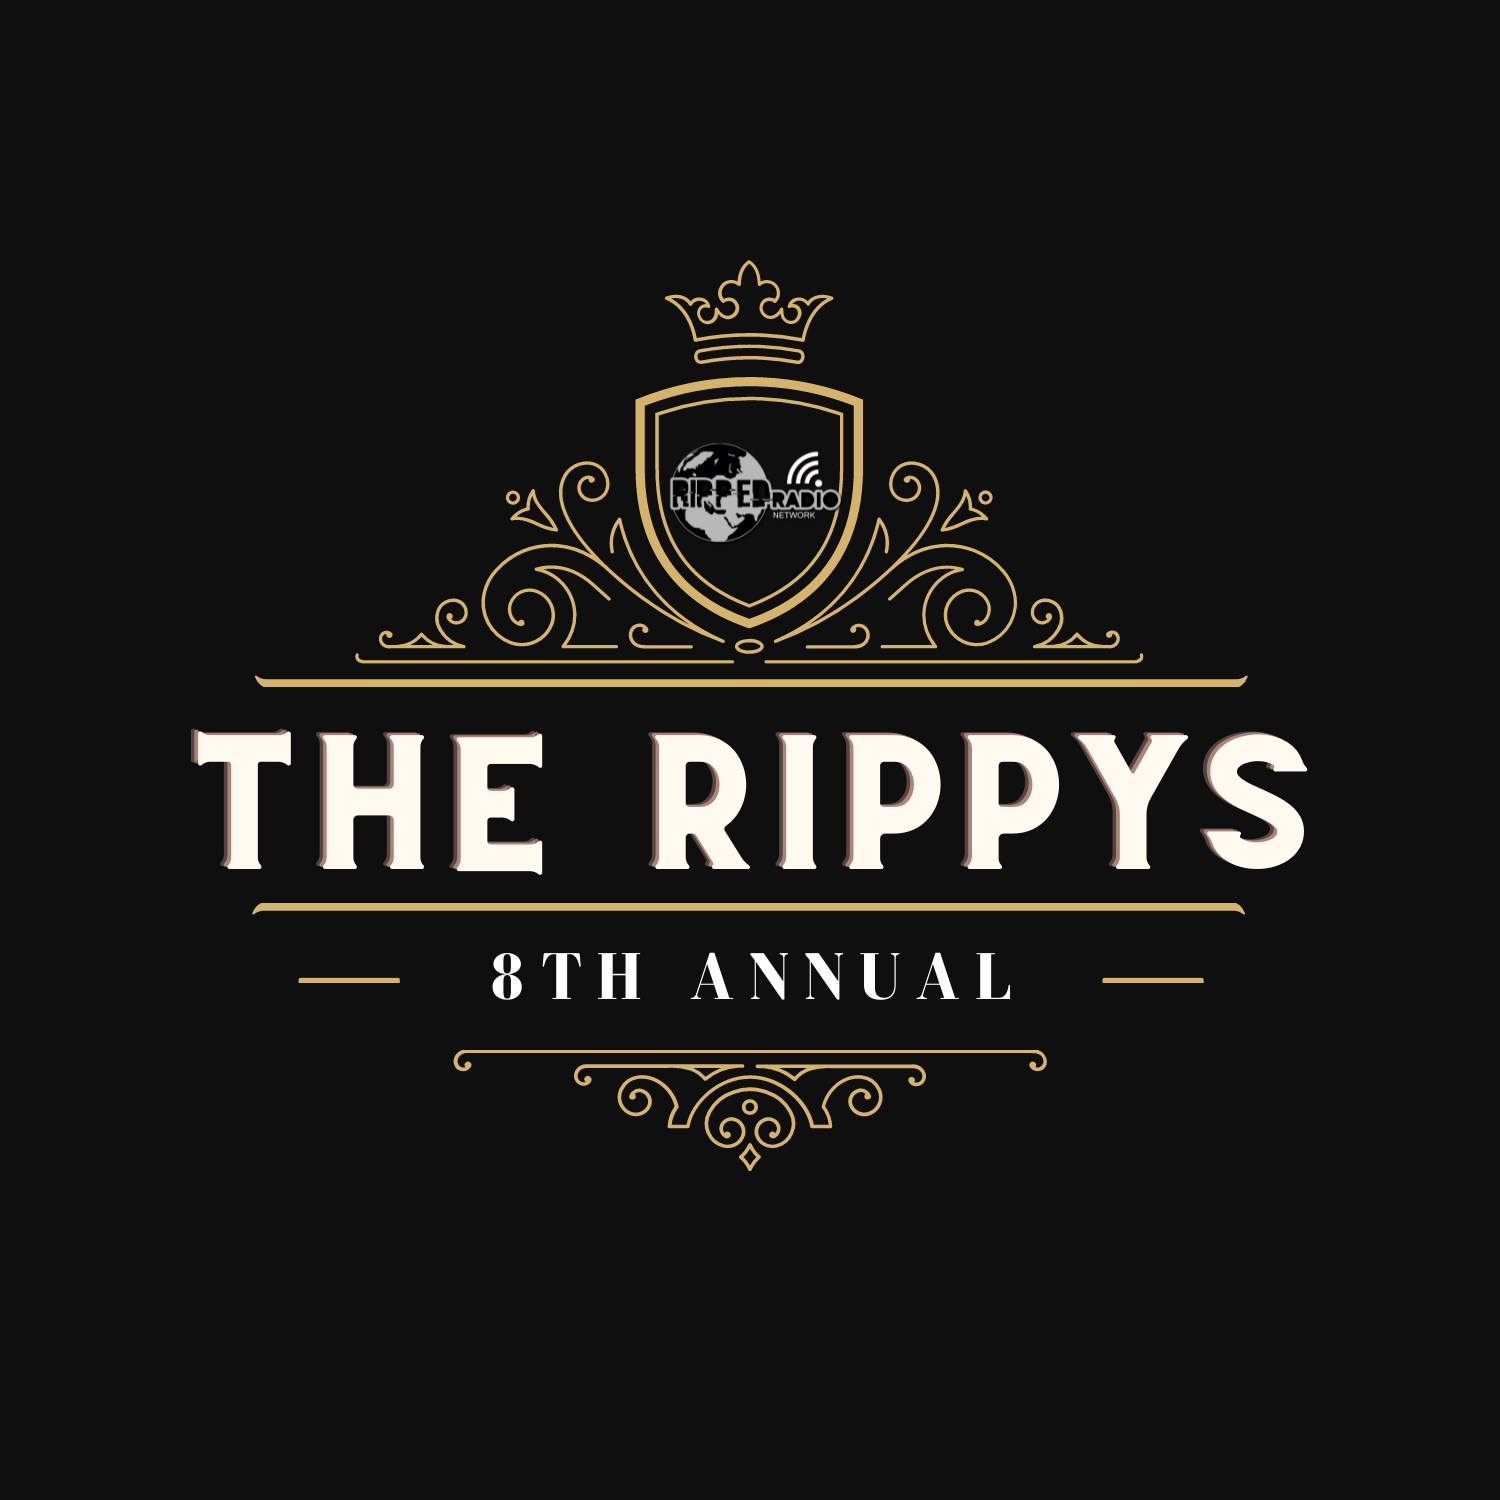 The Rippy's 2021 - 8th Annual